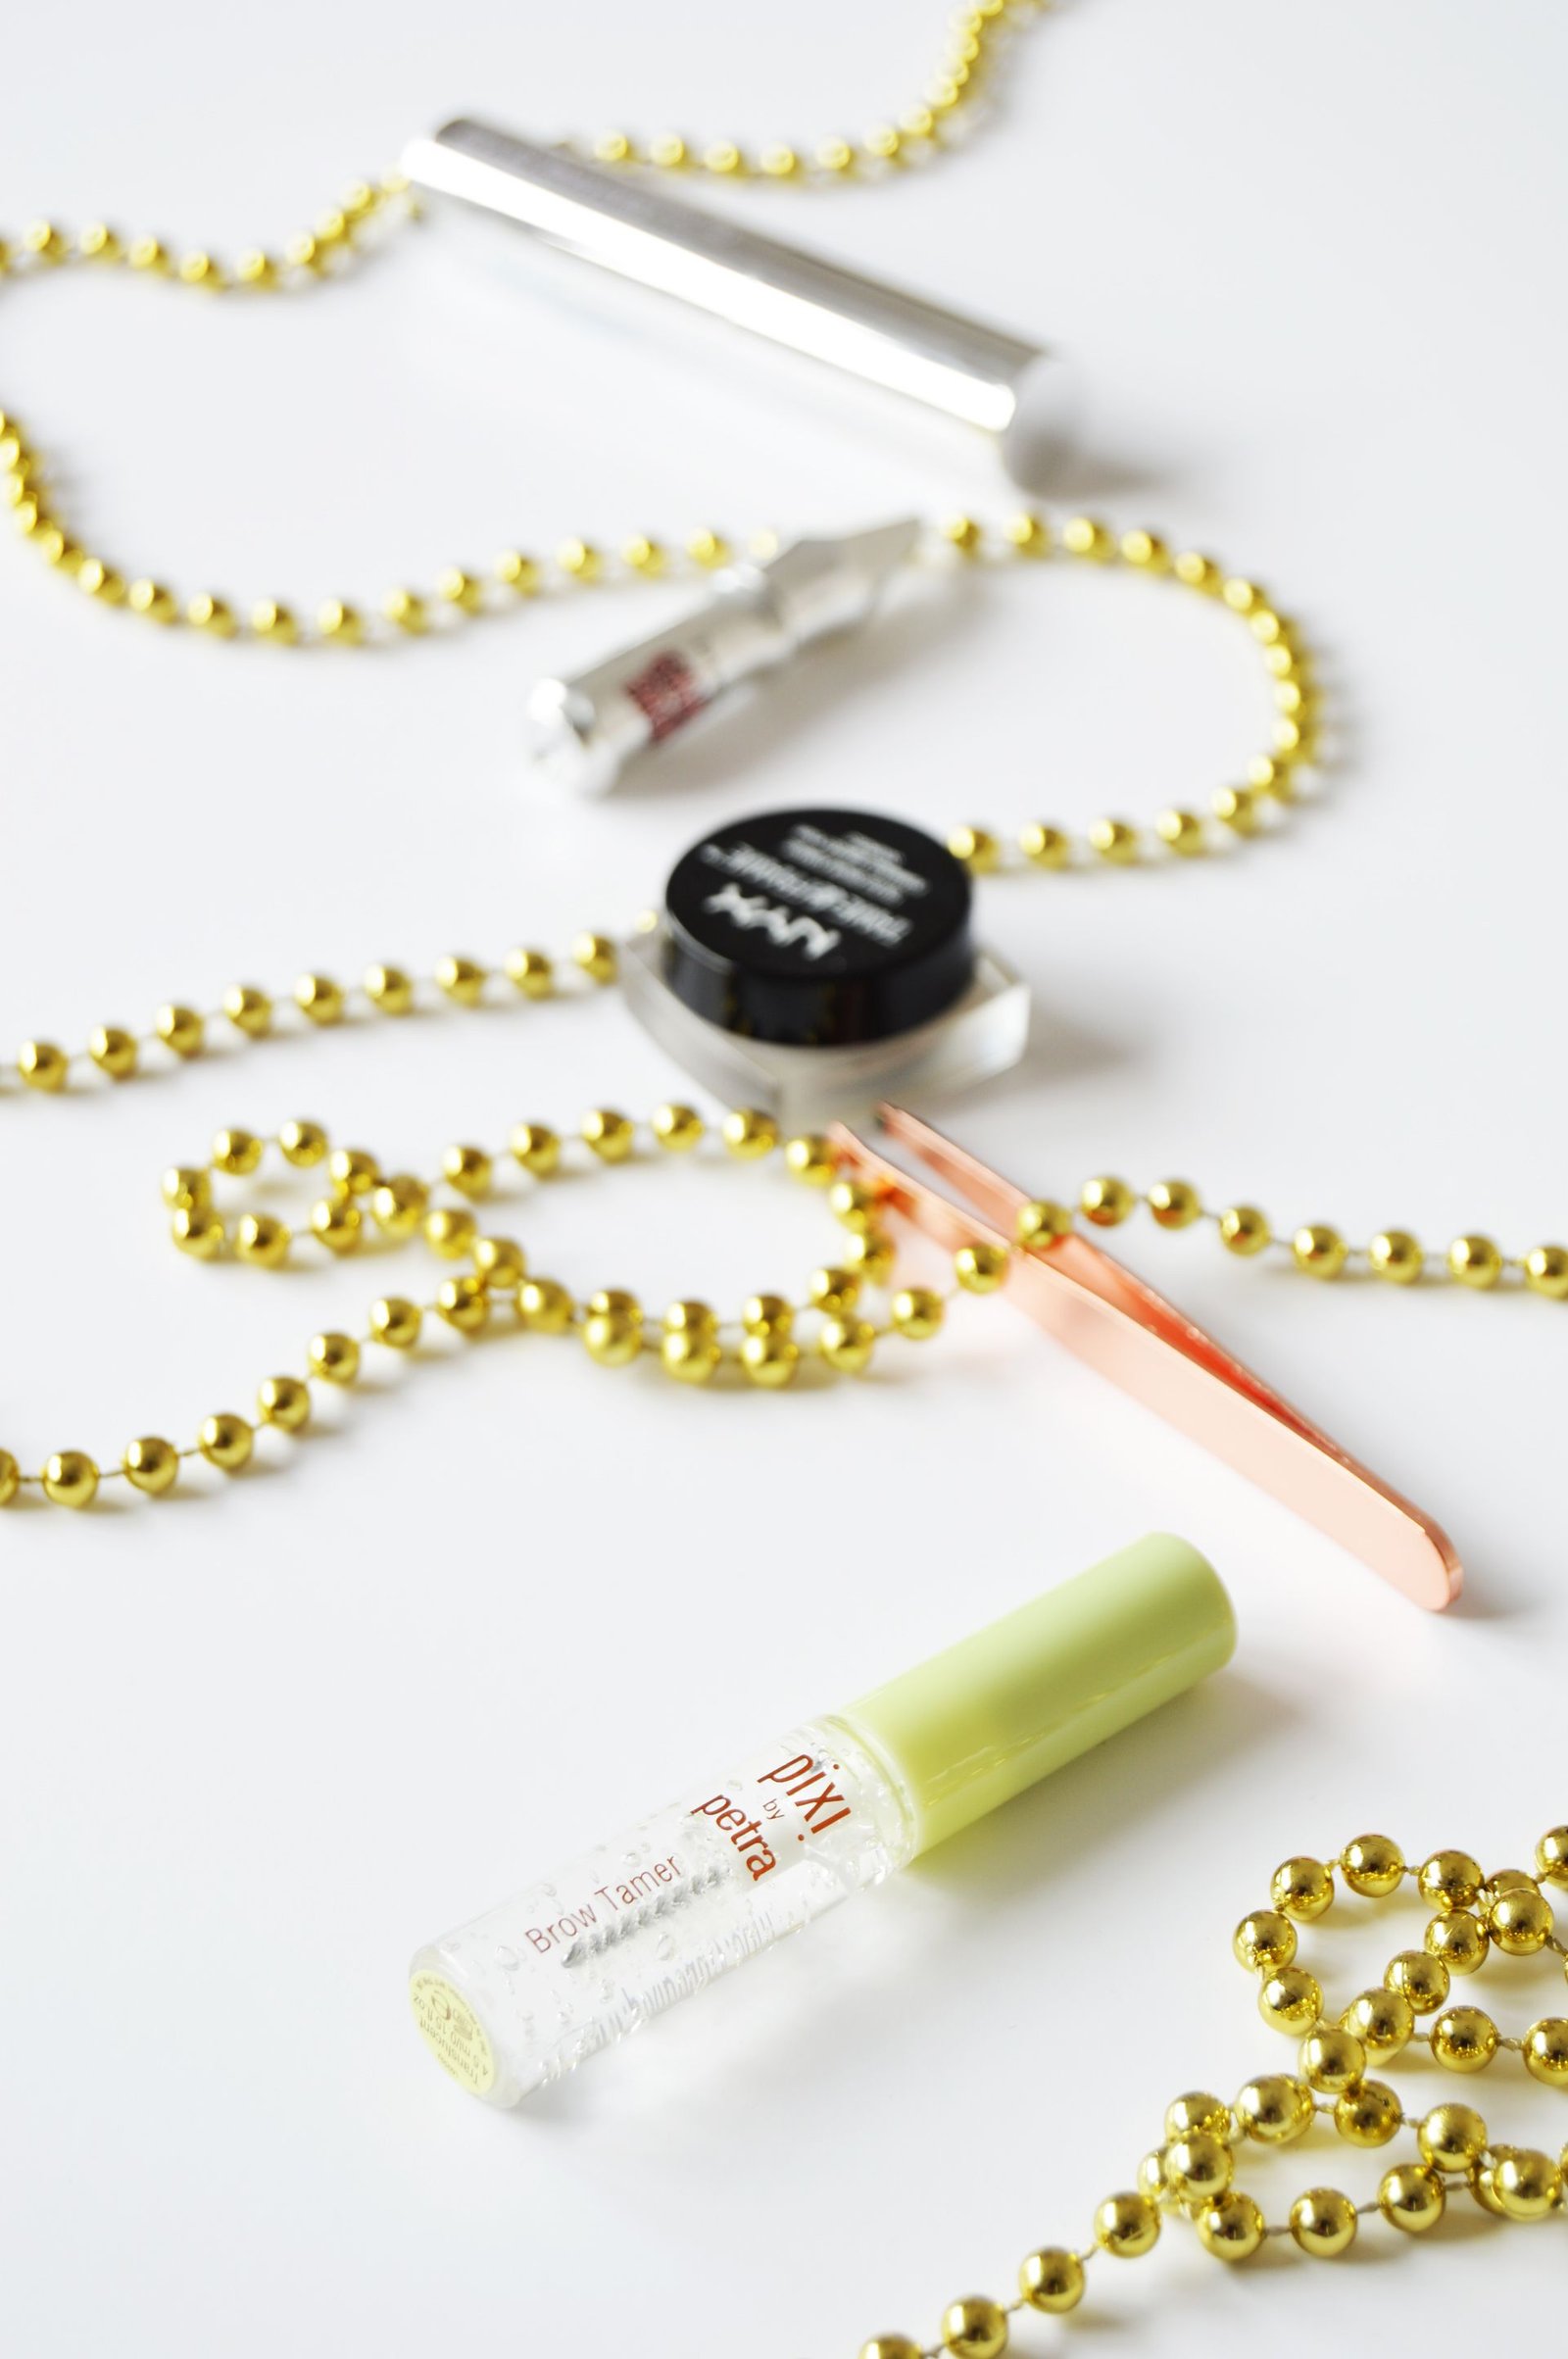 Pixi Brow Tamer claims to be the perfect finishing touch to any brow look, defining & shaping instantly. Pixi Brow Tamer will give you the softest brows so you won't need to worry about having crispy brows but the soft and natural brows.